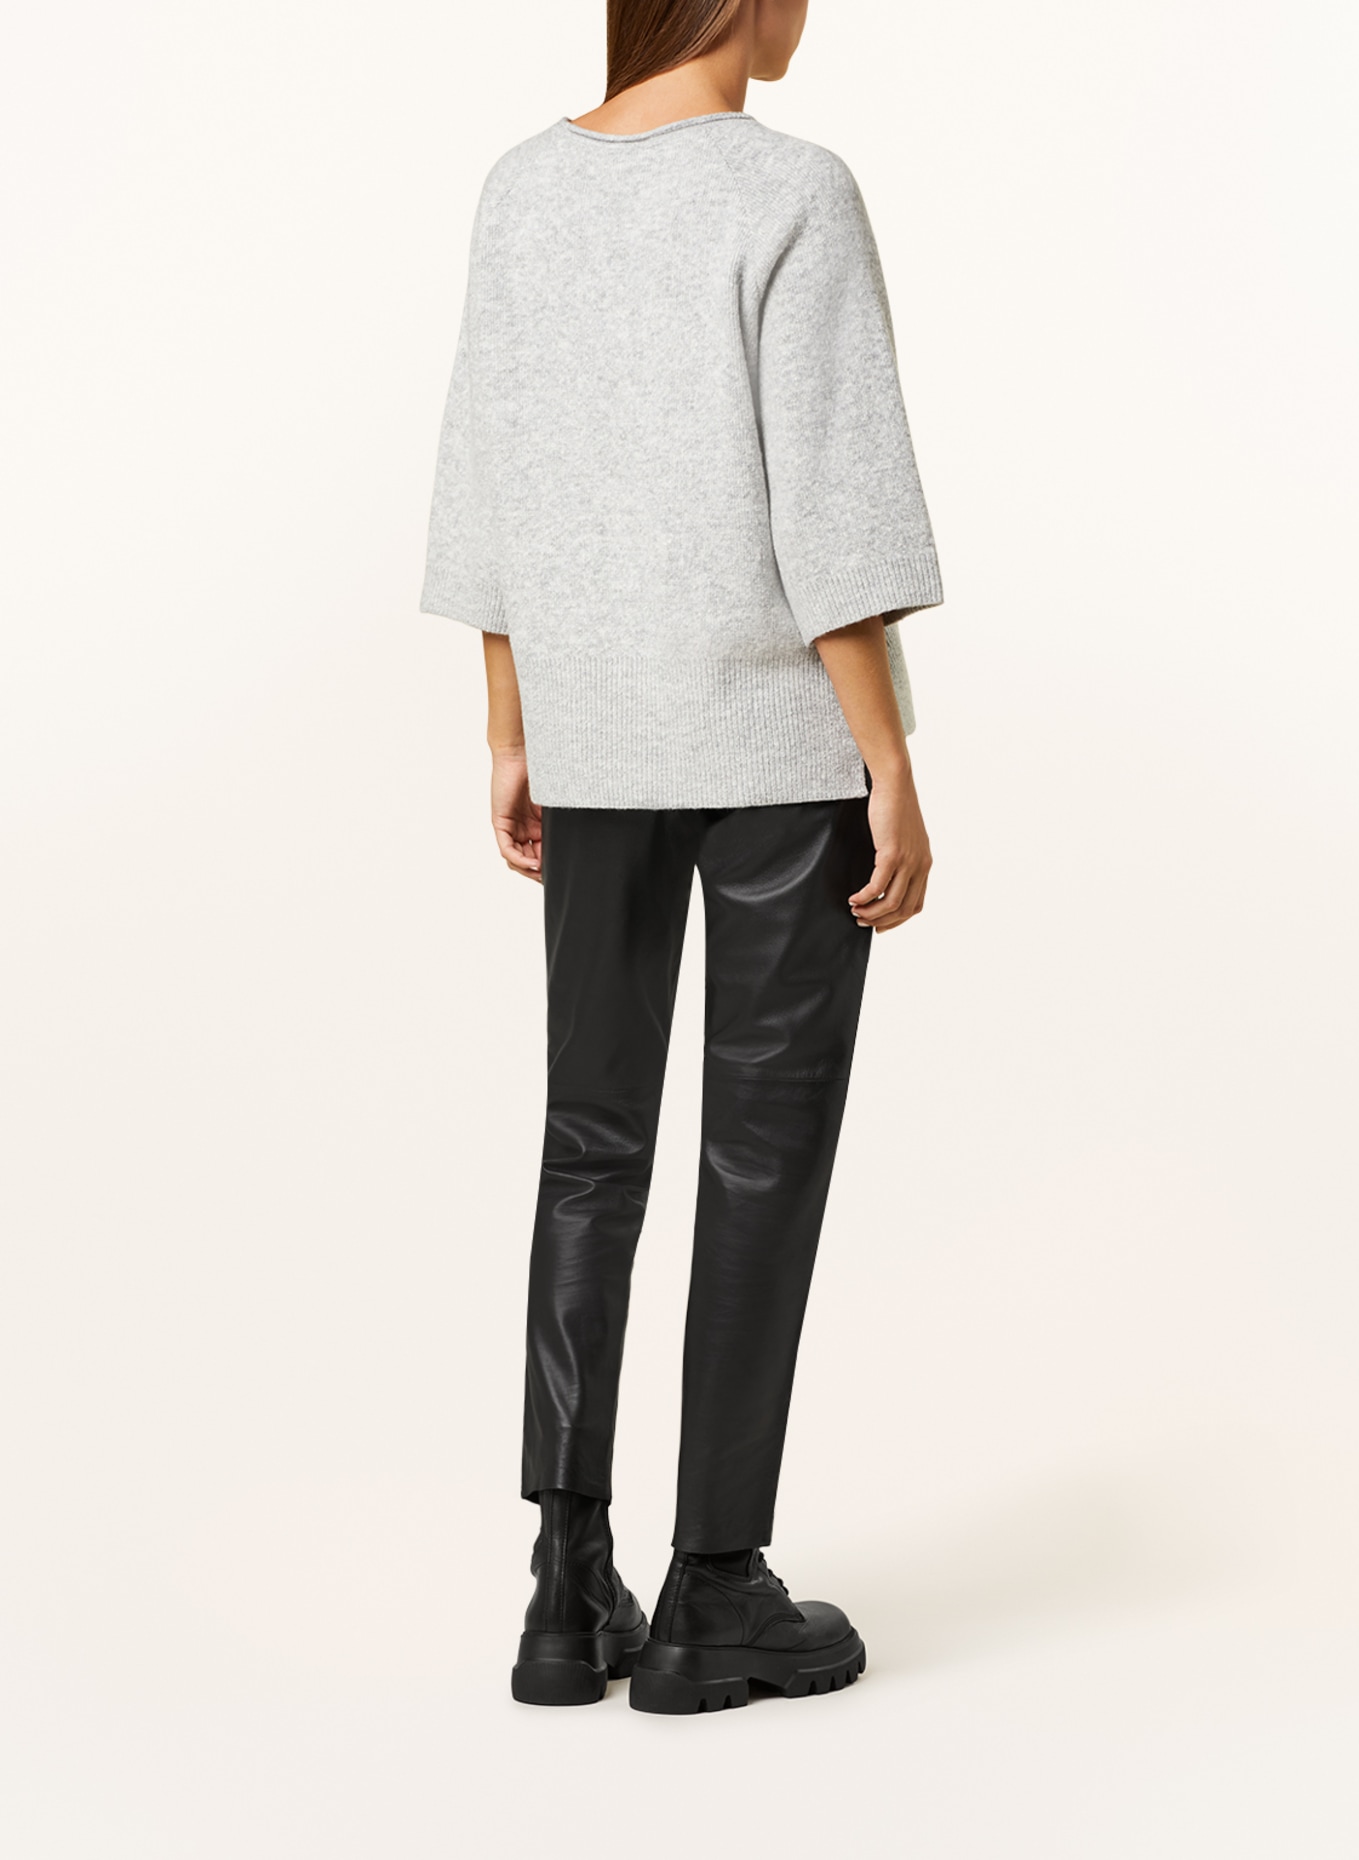 monari Sweater with 3/4 sleeves and decorative gems, Color: GRAY (Image 3)